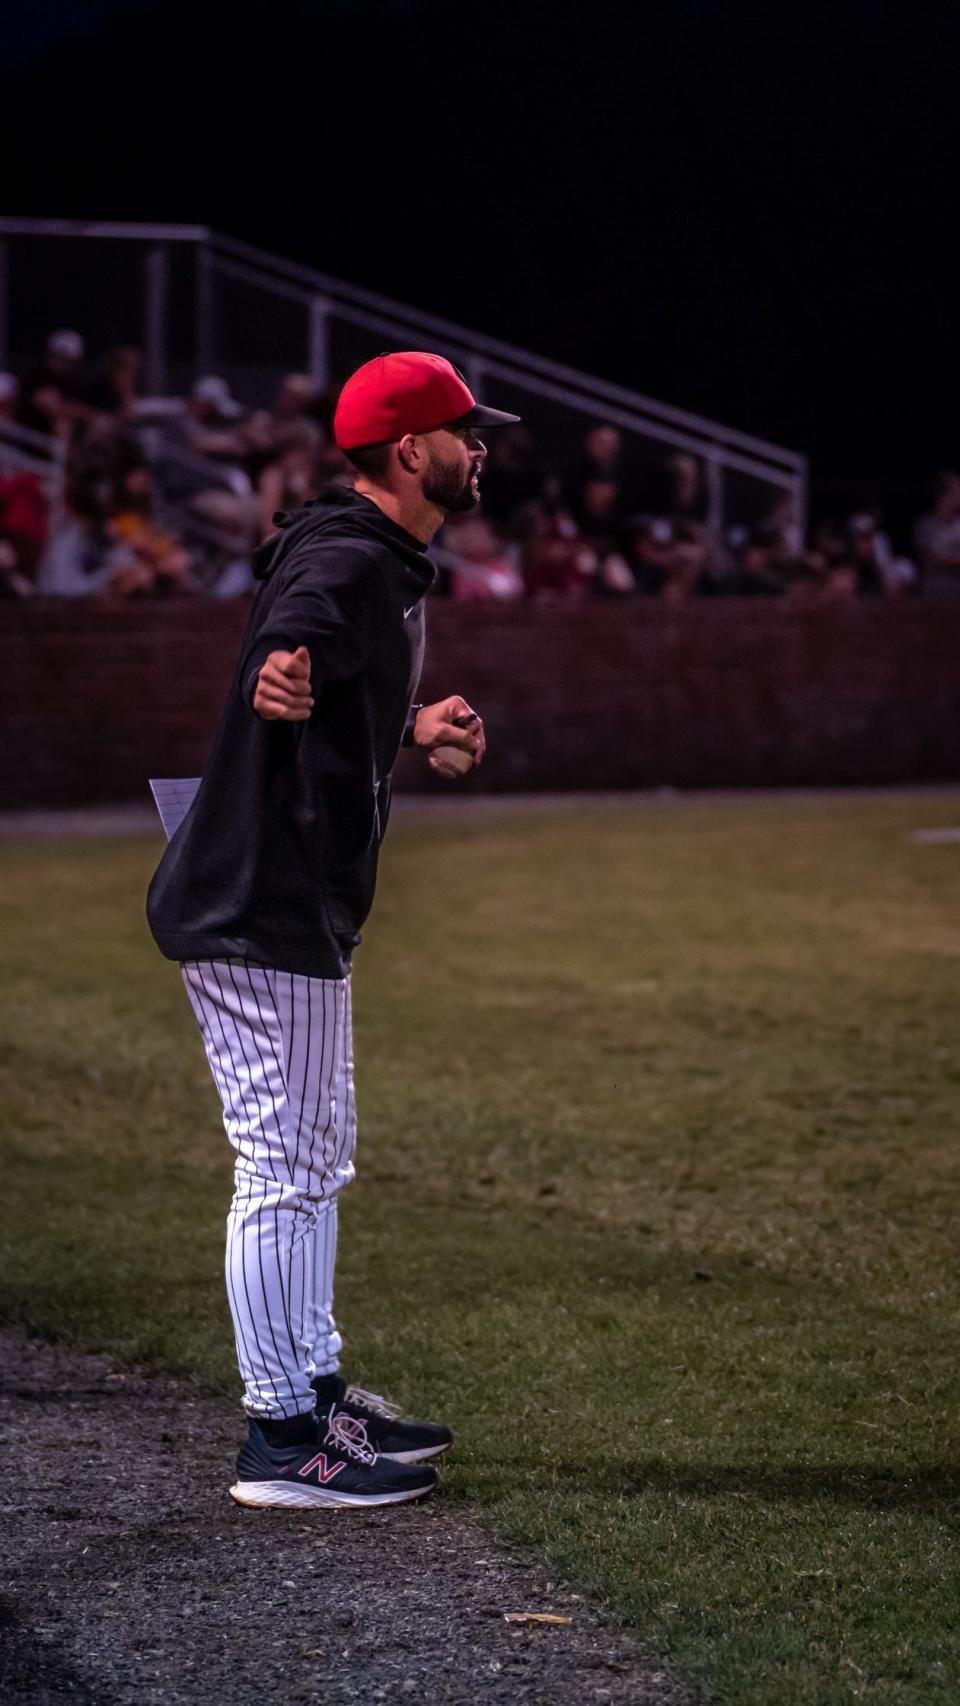 Coach Brandon Roberts, who also co-teaches math classes, grew up in Fort Lauderdale and moved to East Tennessee to attend Carson-Newman and play baseball. “I stayed on as assistant coach at Carson-Newman,” he said. “I coached a summer of travel baseball, but this is only my second year as coach, and this is my first full year.”